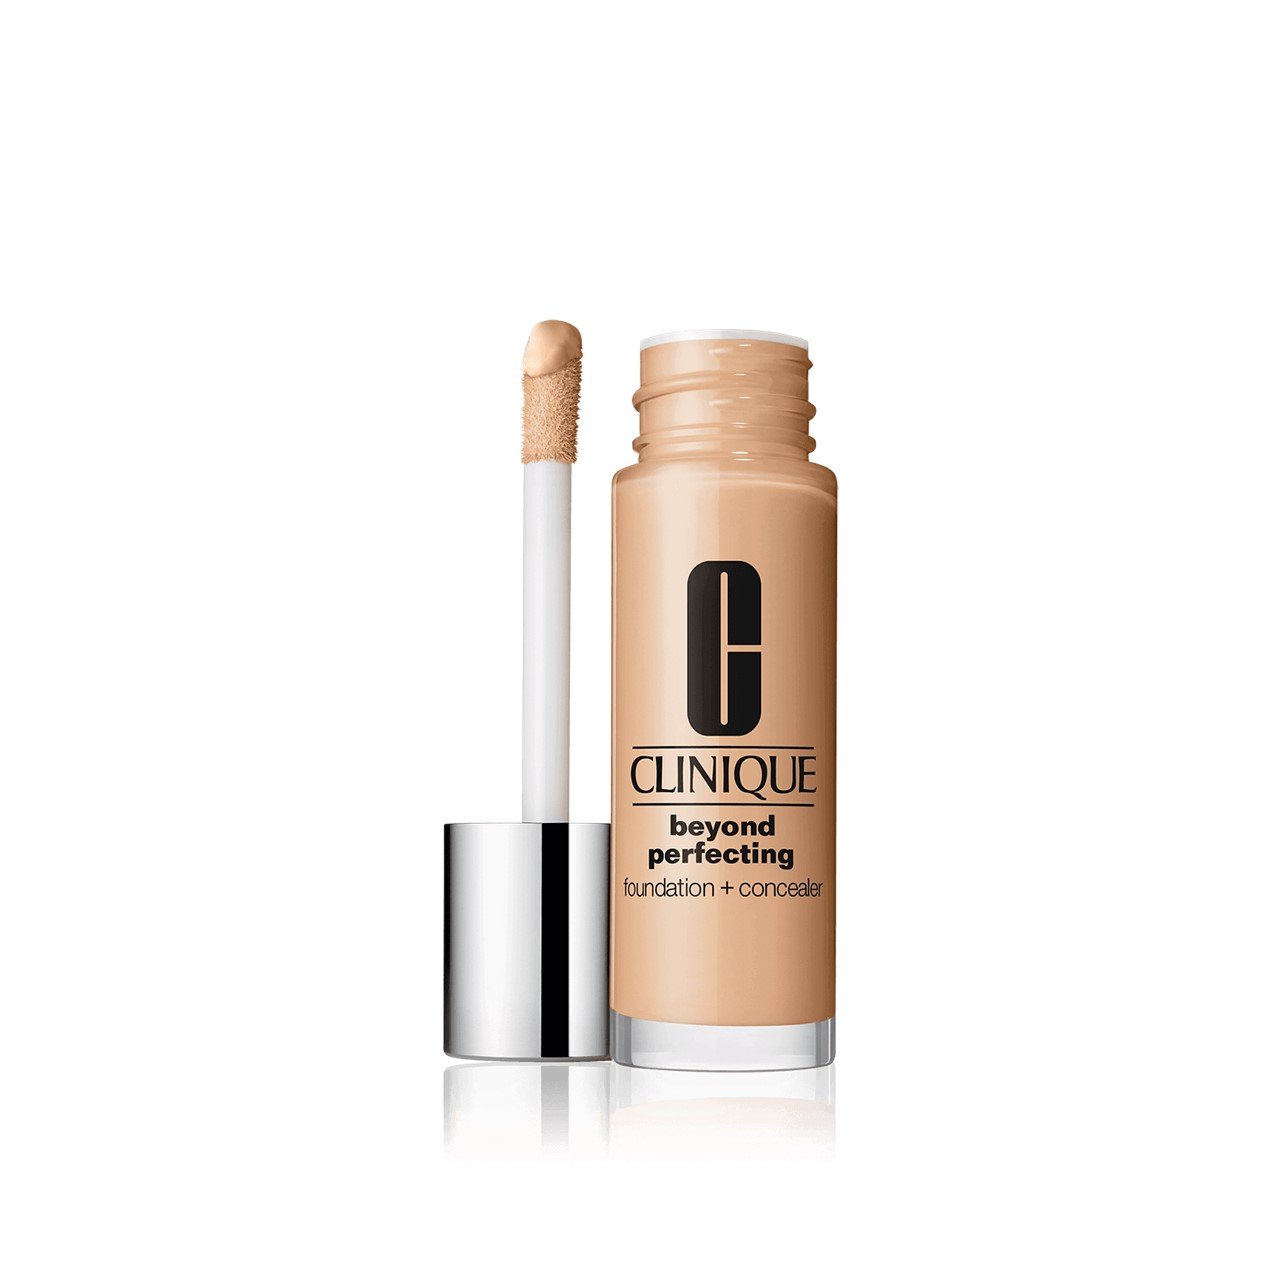 Clinique Beyond Perfecting Foundation Concealer CN28 Ivory 30ml (1.01fl oz)